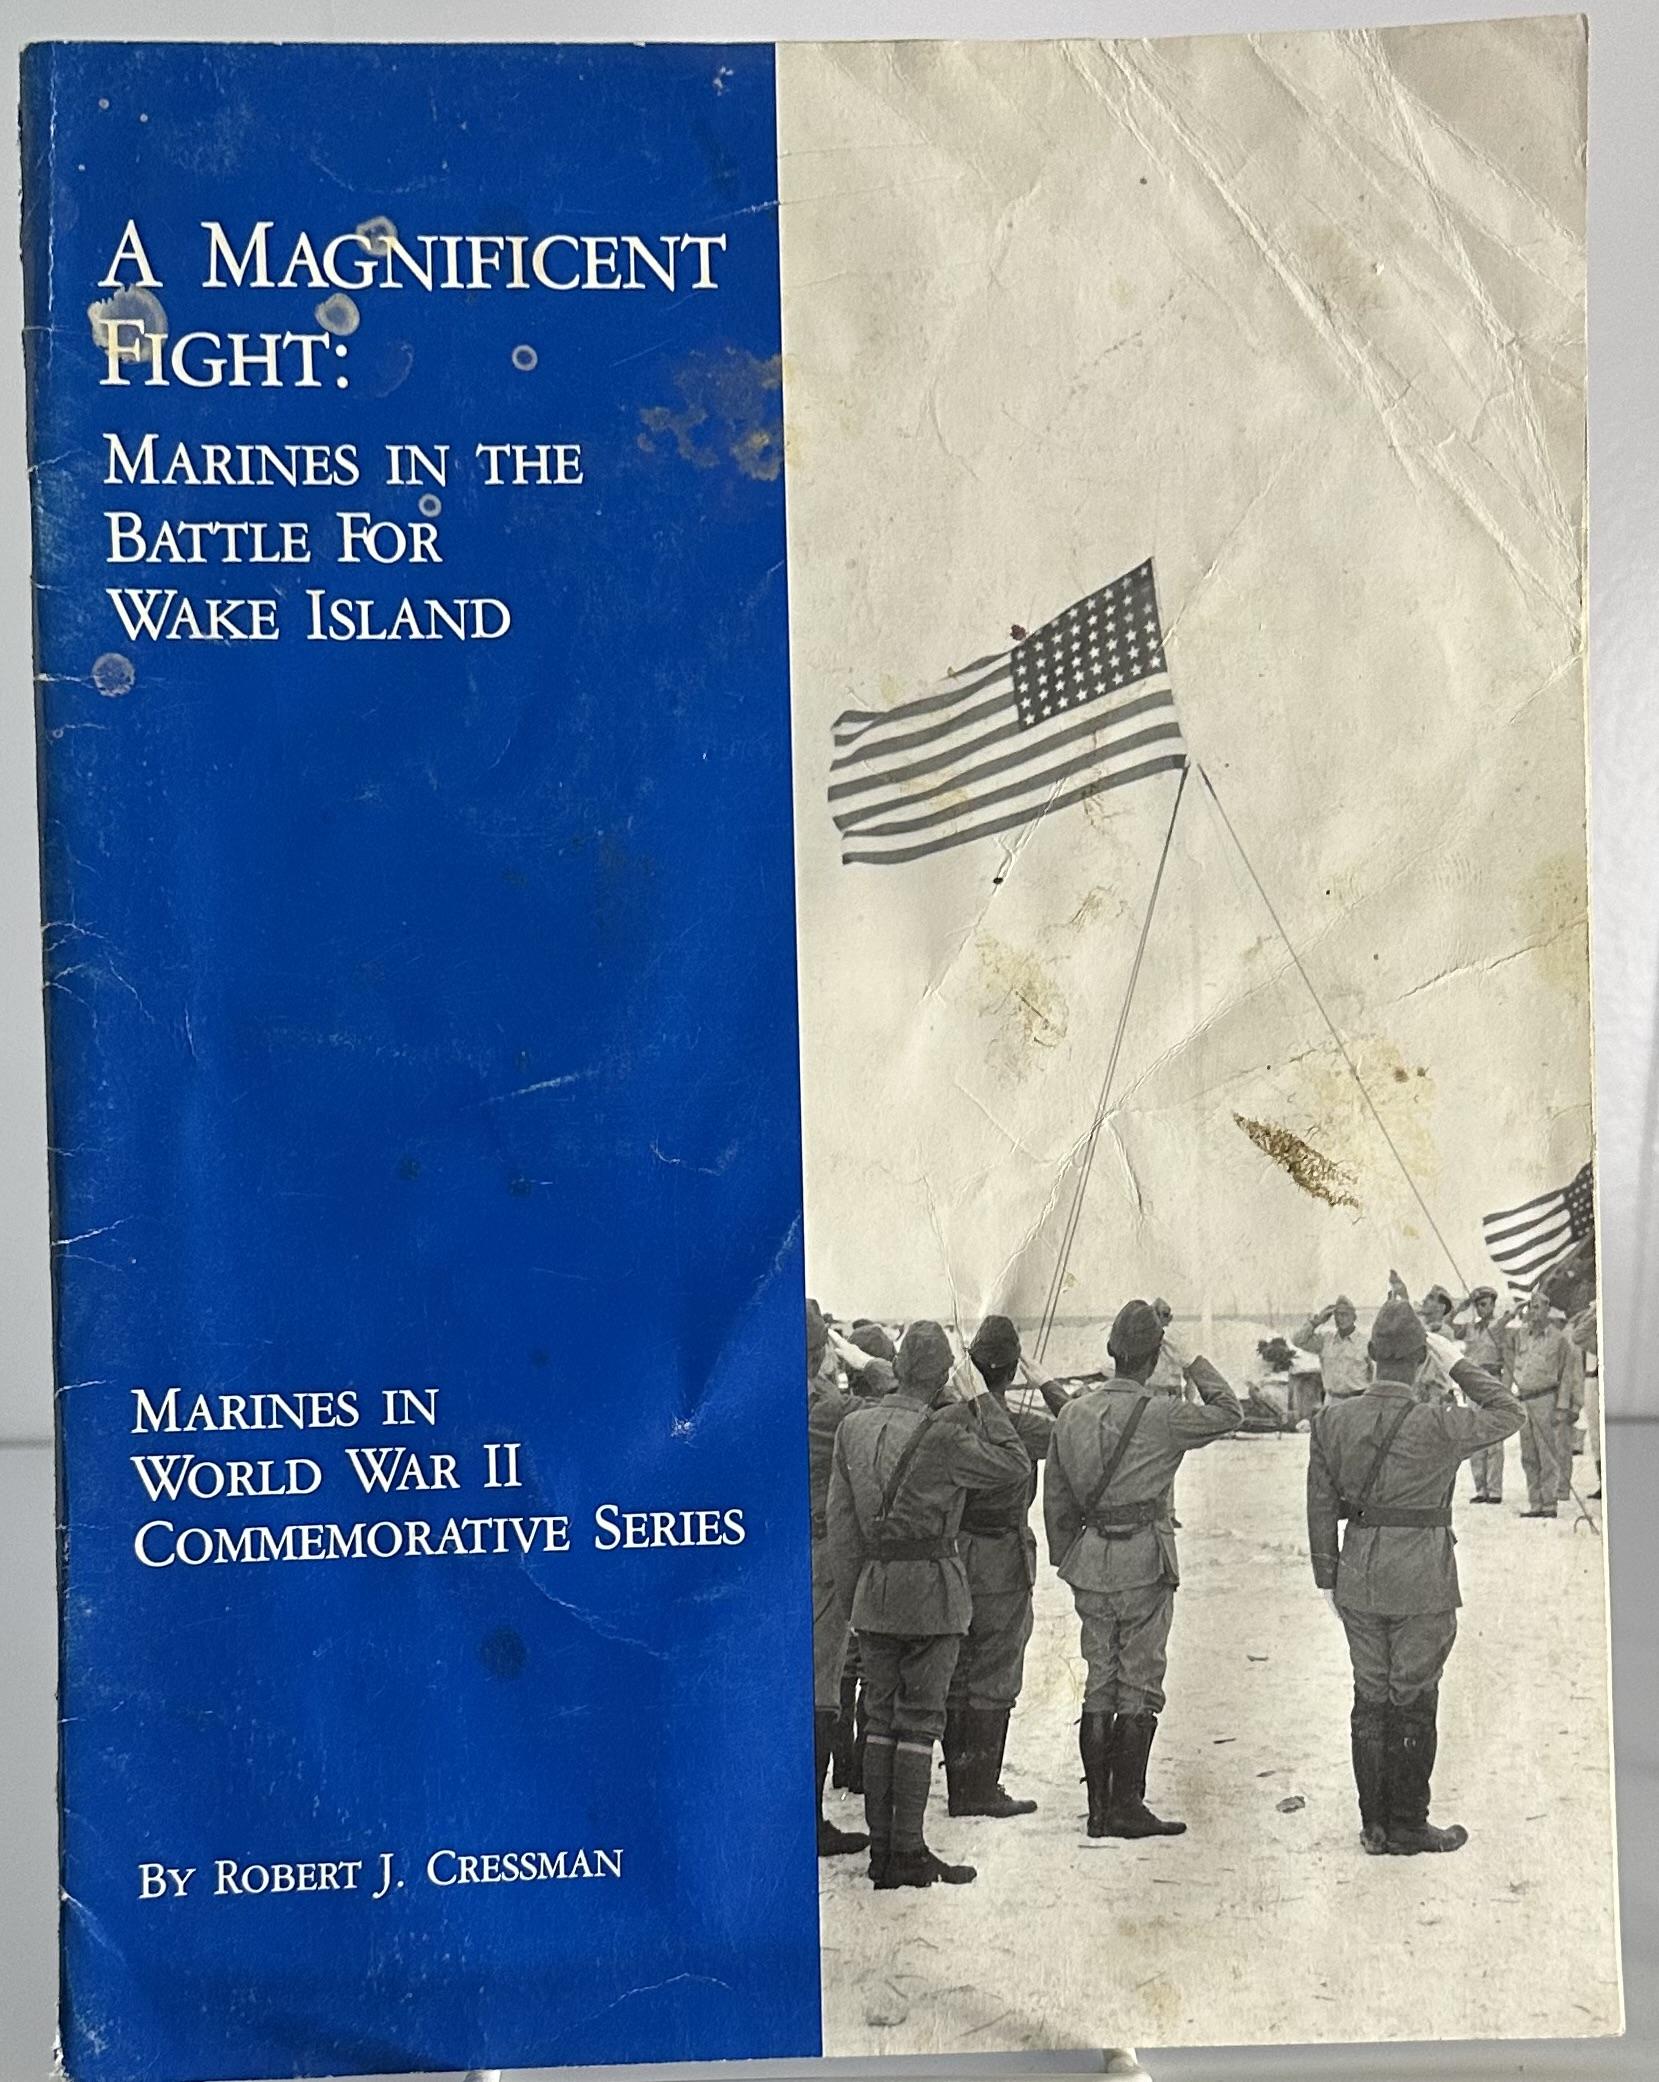 A Magnificent Fight: Marines in the Battle for Wake Island (Marines in World War II Commemorative Series) - Robert J. Cressman